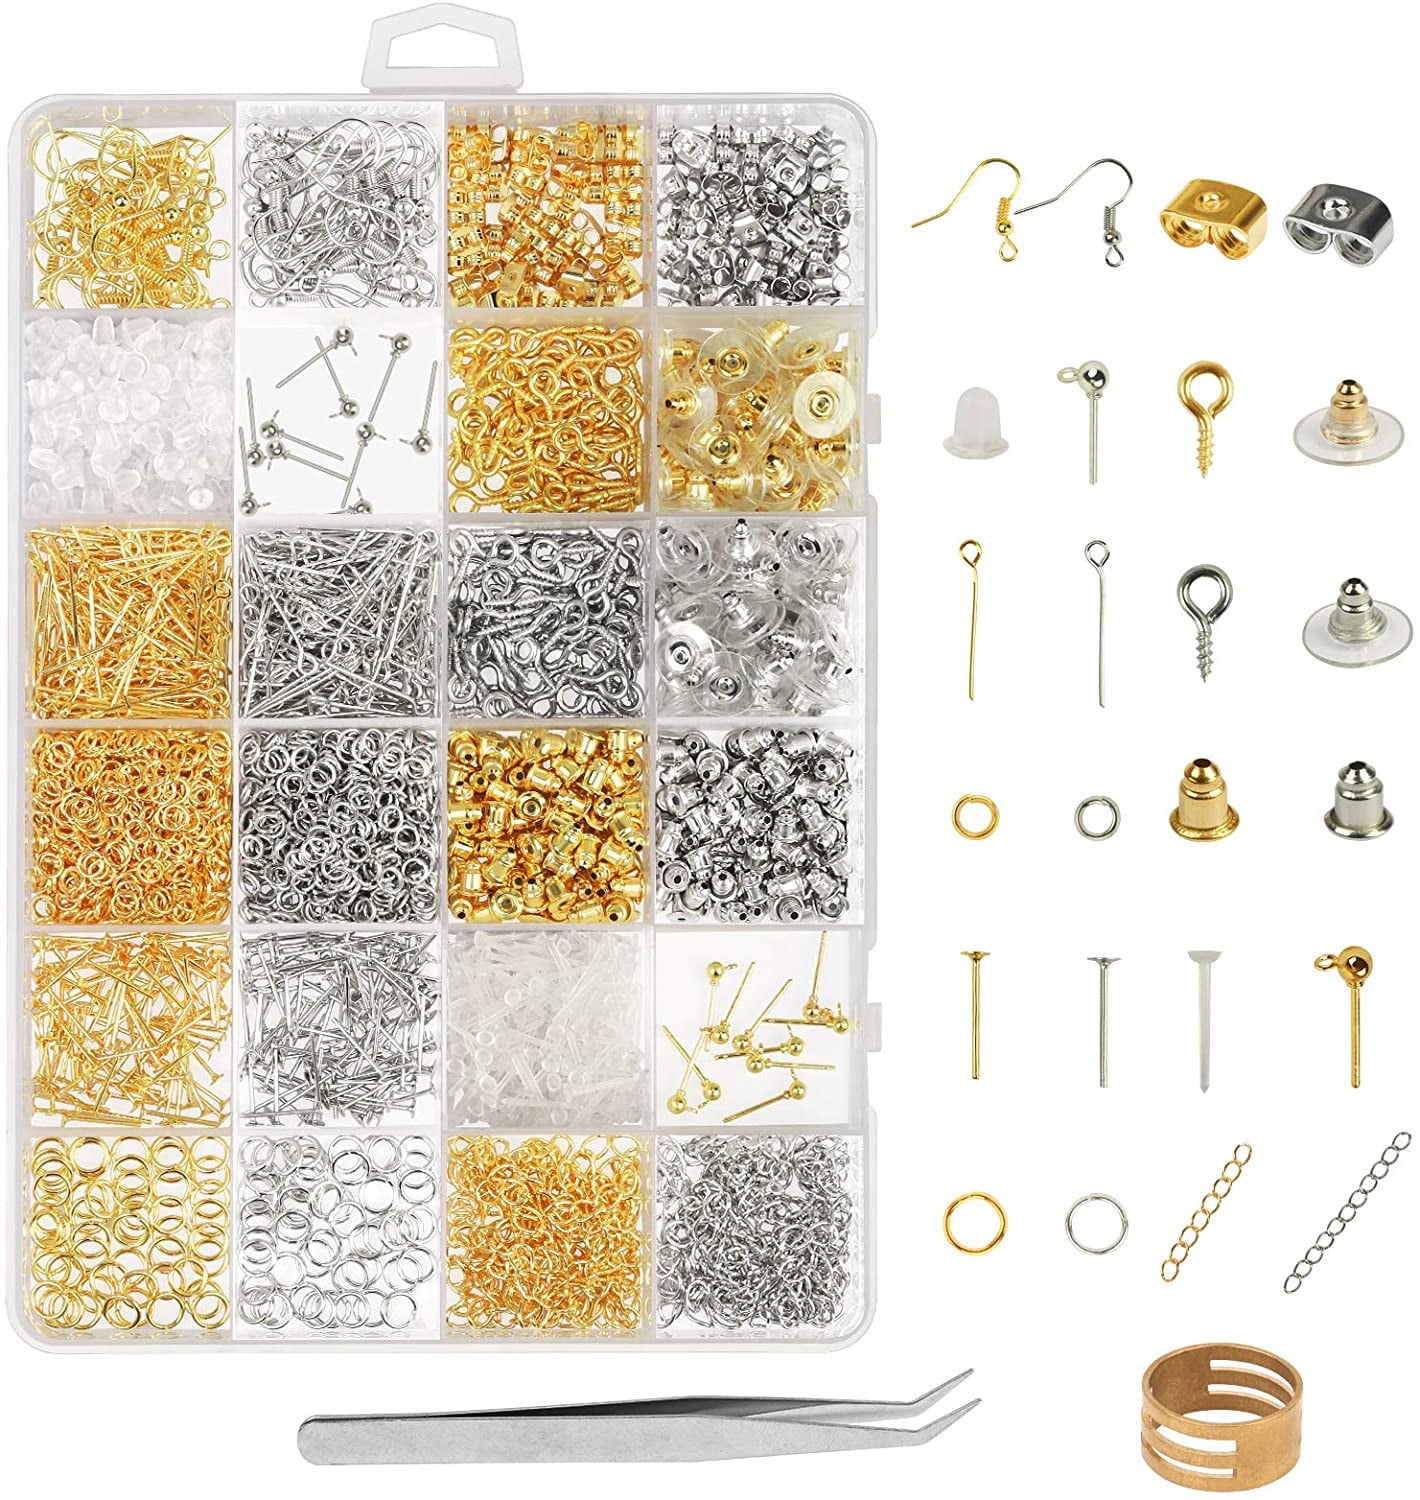 Paxcoo 2400Pcs Earring Making Supplies Kit with 24 Style Earring Hooks,  Earring Backs, Earrings Posts and Earring Making Findings for Adult